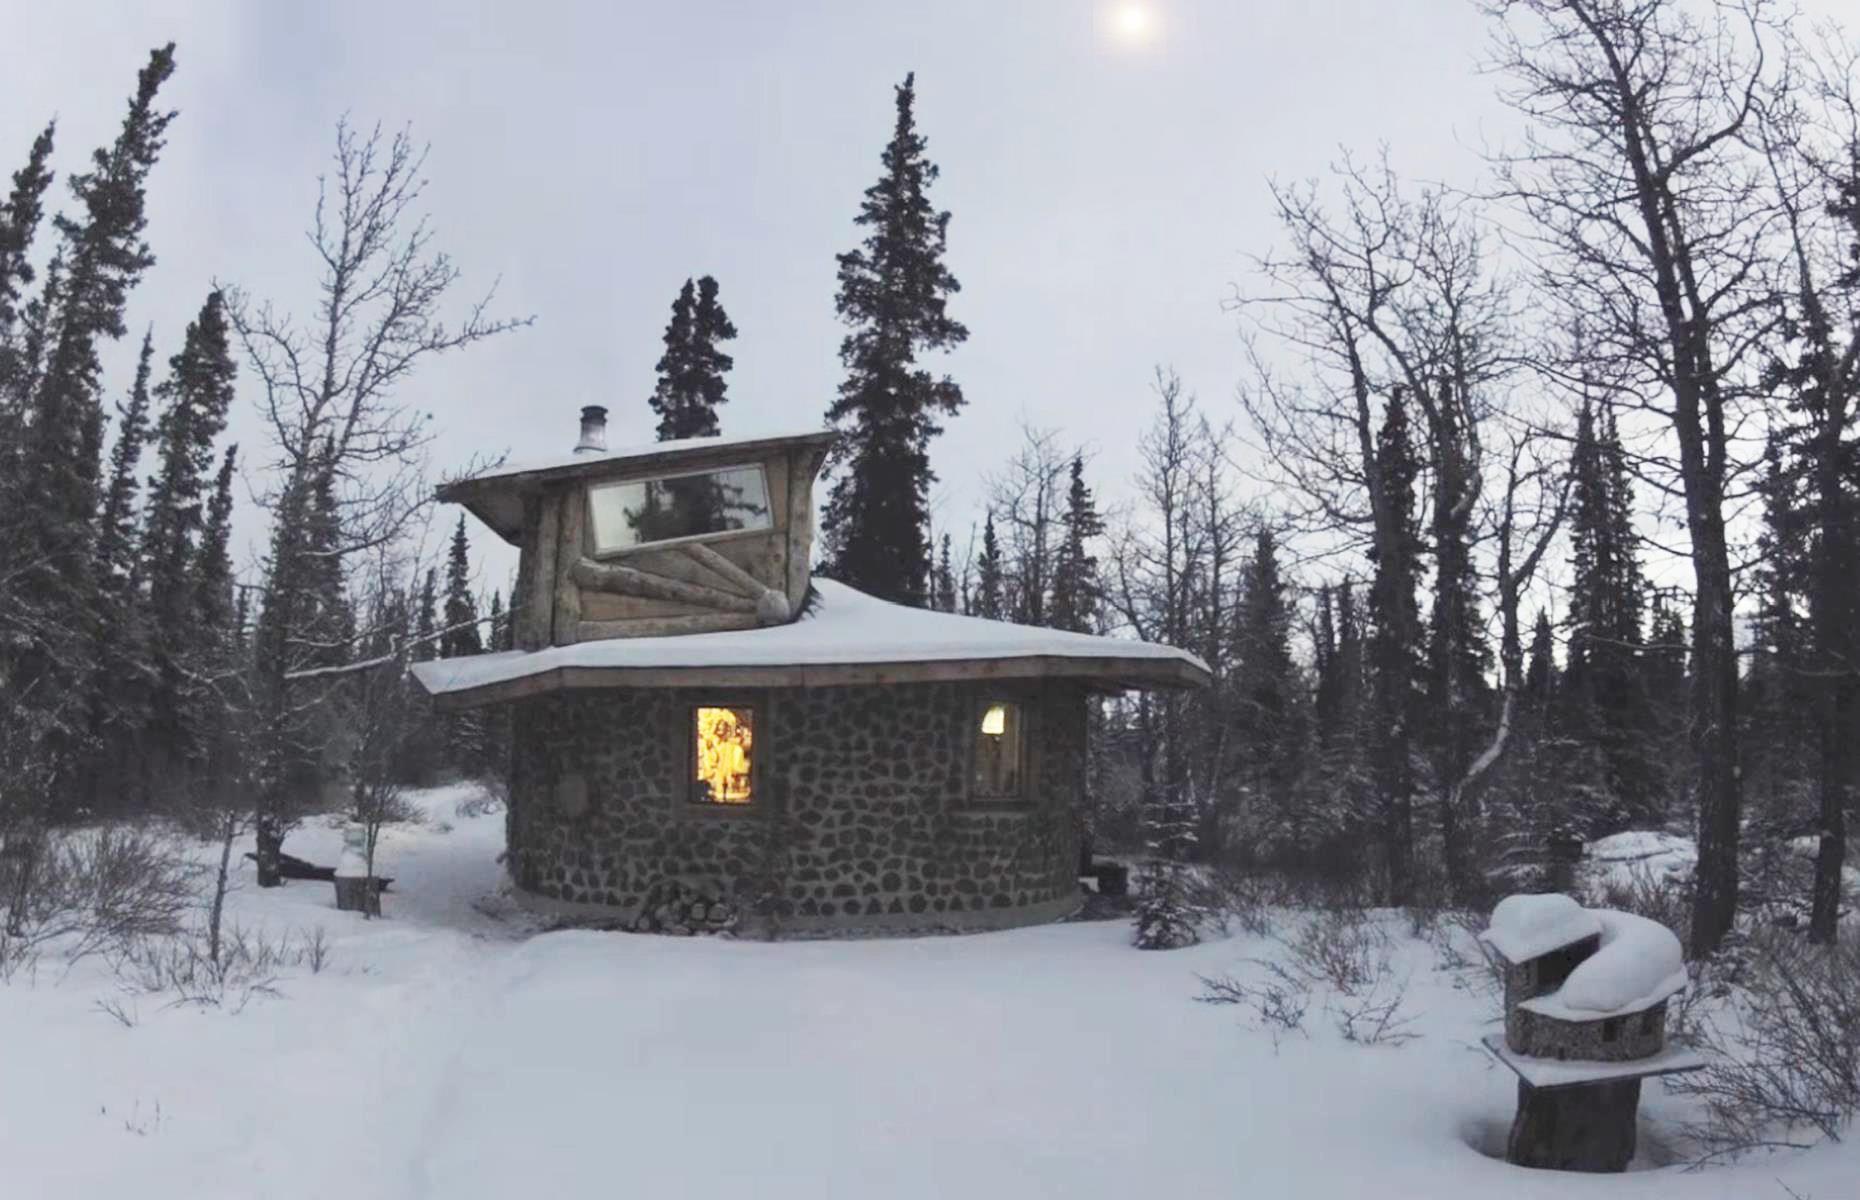 <p>This round little house in the <a href="https://www.loveproperty.com/gallerylist/70498/the-deep-freeze-homes-vs-the-snow">snowy wilderness</a> was built in Yukon Territory, Canada, by <a href="https://www.youtube.com/channel/UCIgKXE6qVQotojl6Z_5ia5g">Sally Wright</a>. She had dreamed about living in a rustic house in the wilderness for years. Sally made a <a href="https://www.youtube.com/watch?v=-YQ7kMyWeyw">short film</a> about the construction process to realizing those dreams.</p>